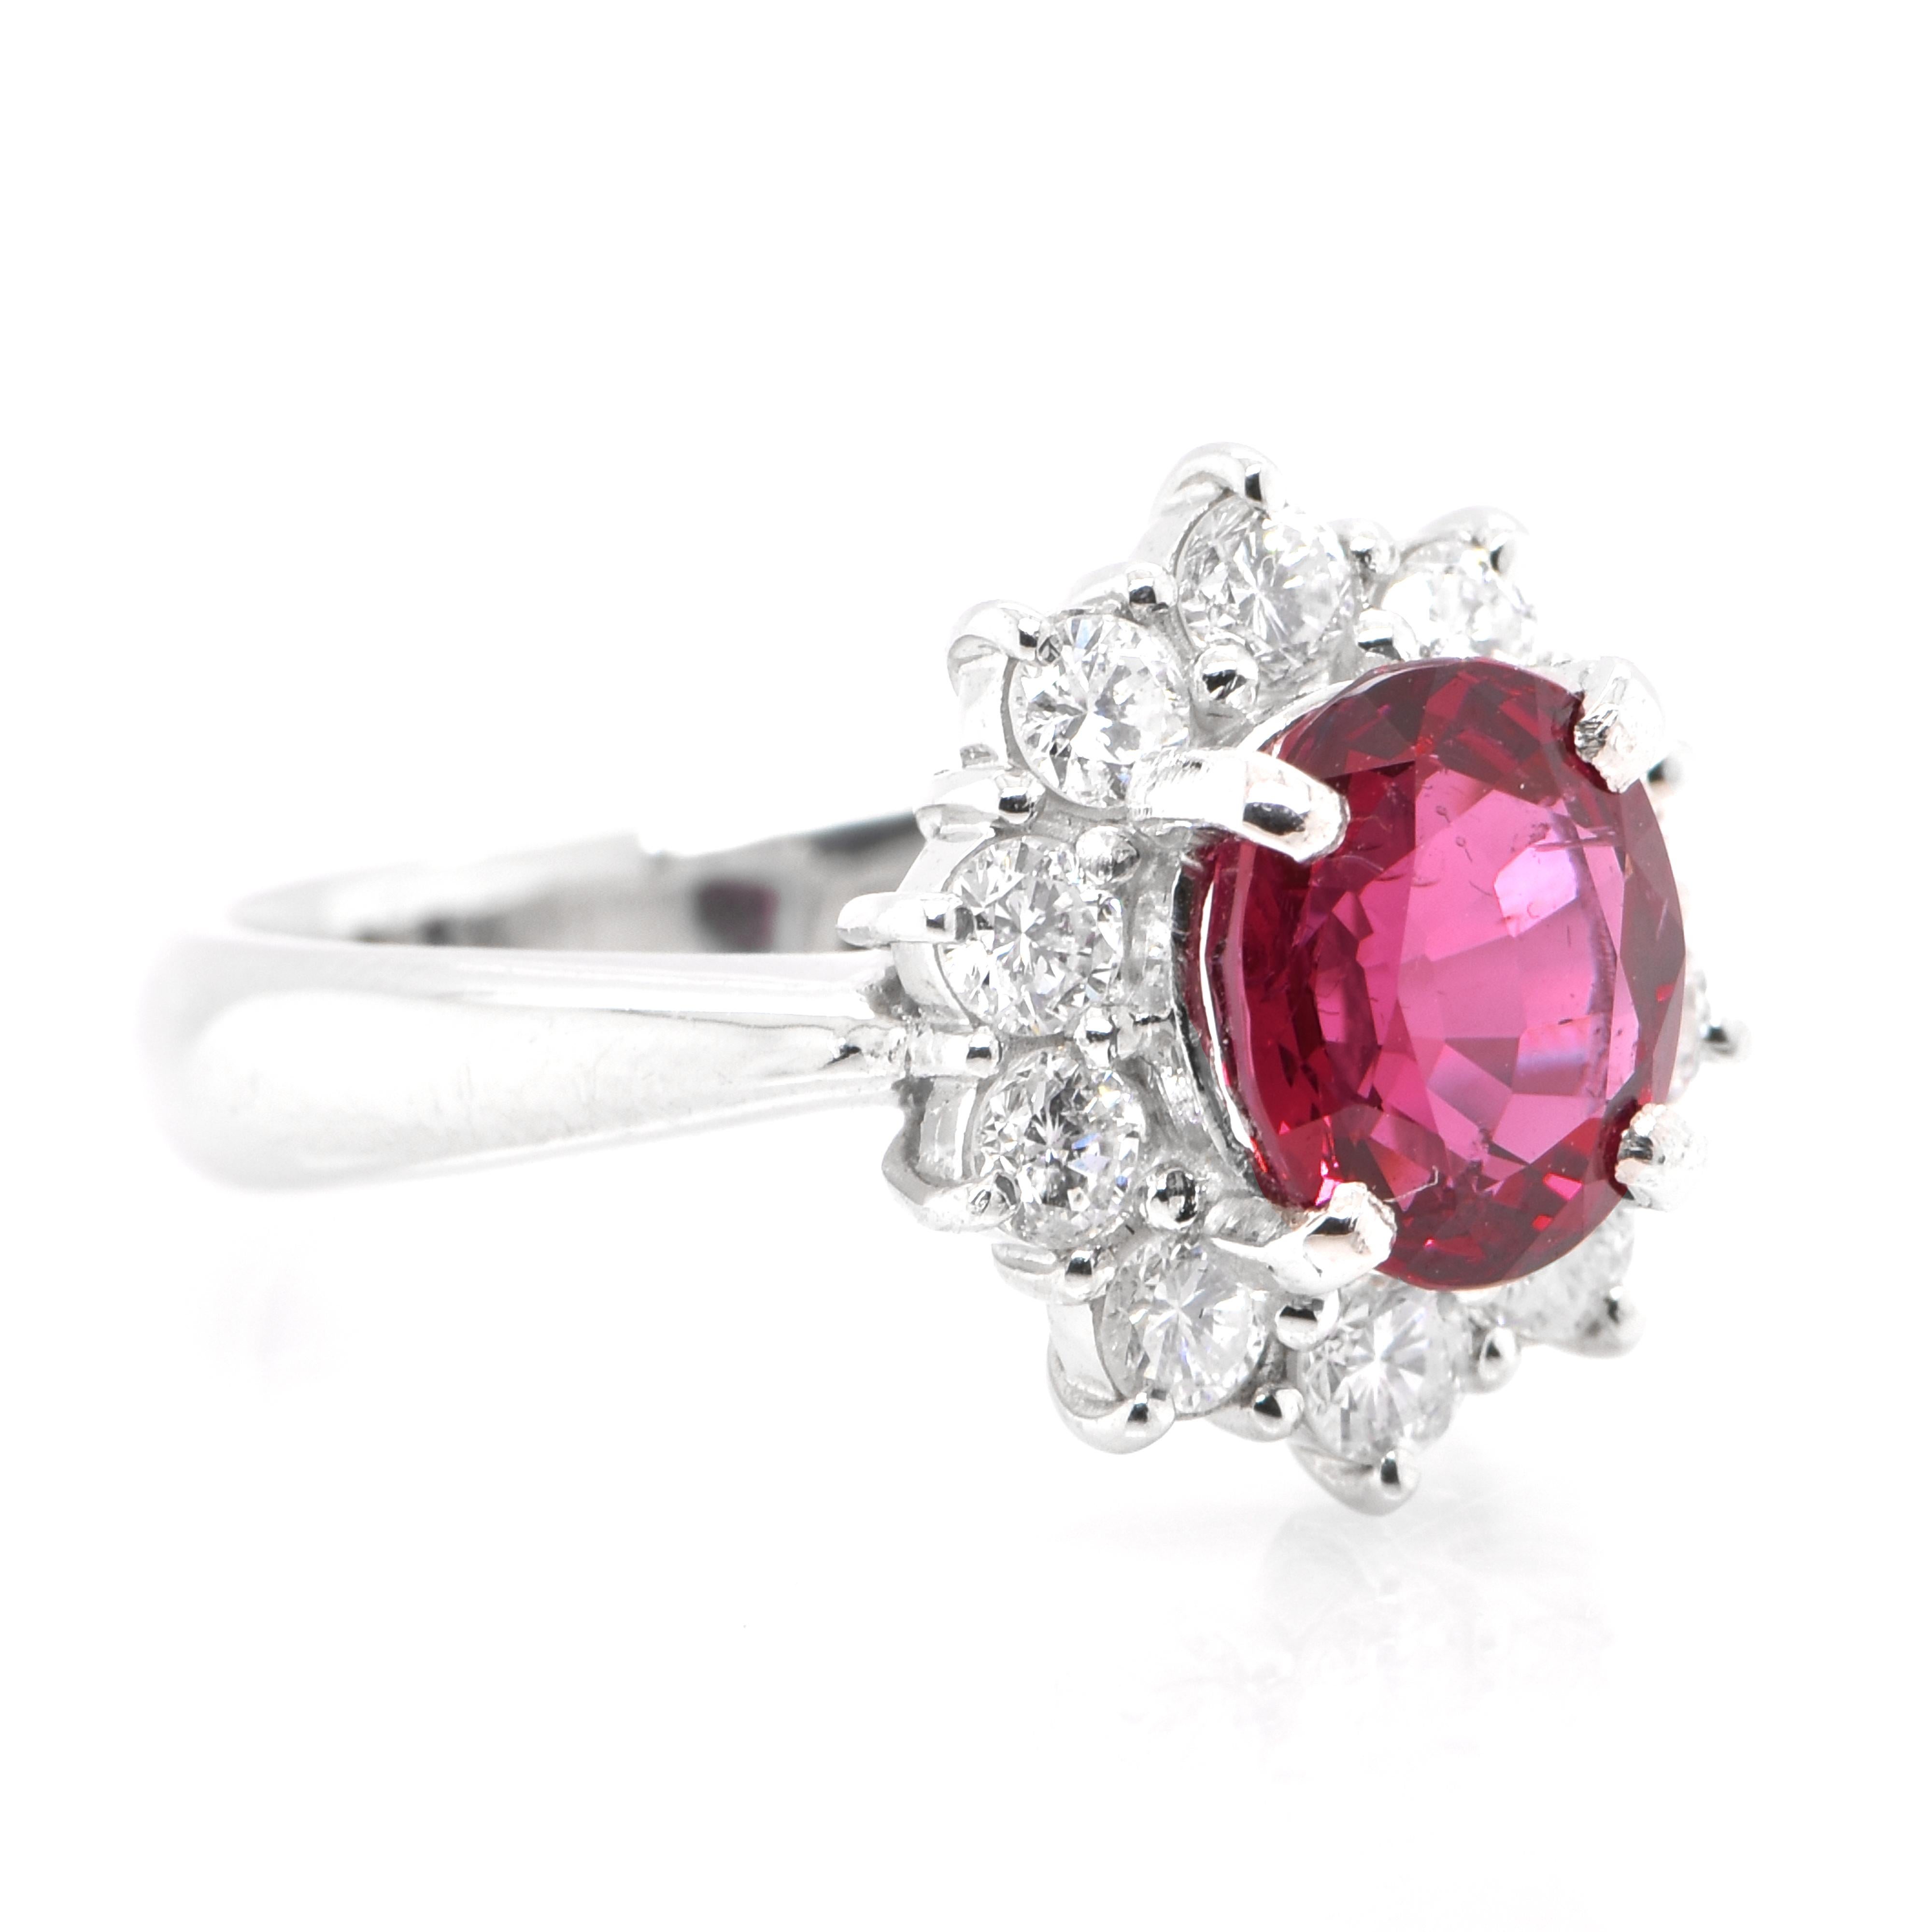 Modern 1.83 Carat Natural Red Spinel and Diamond Halo Ring Set in Platinum